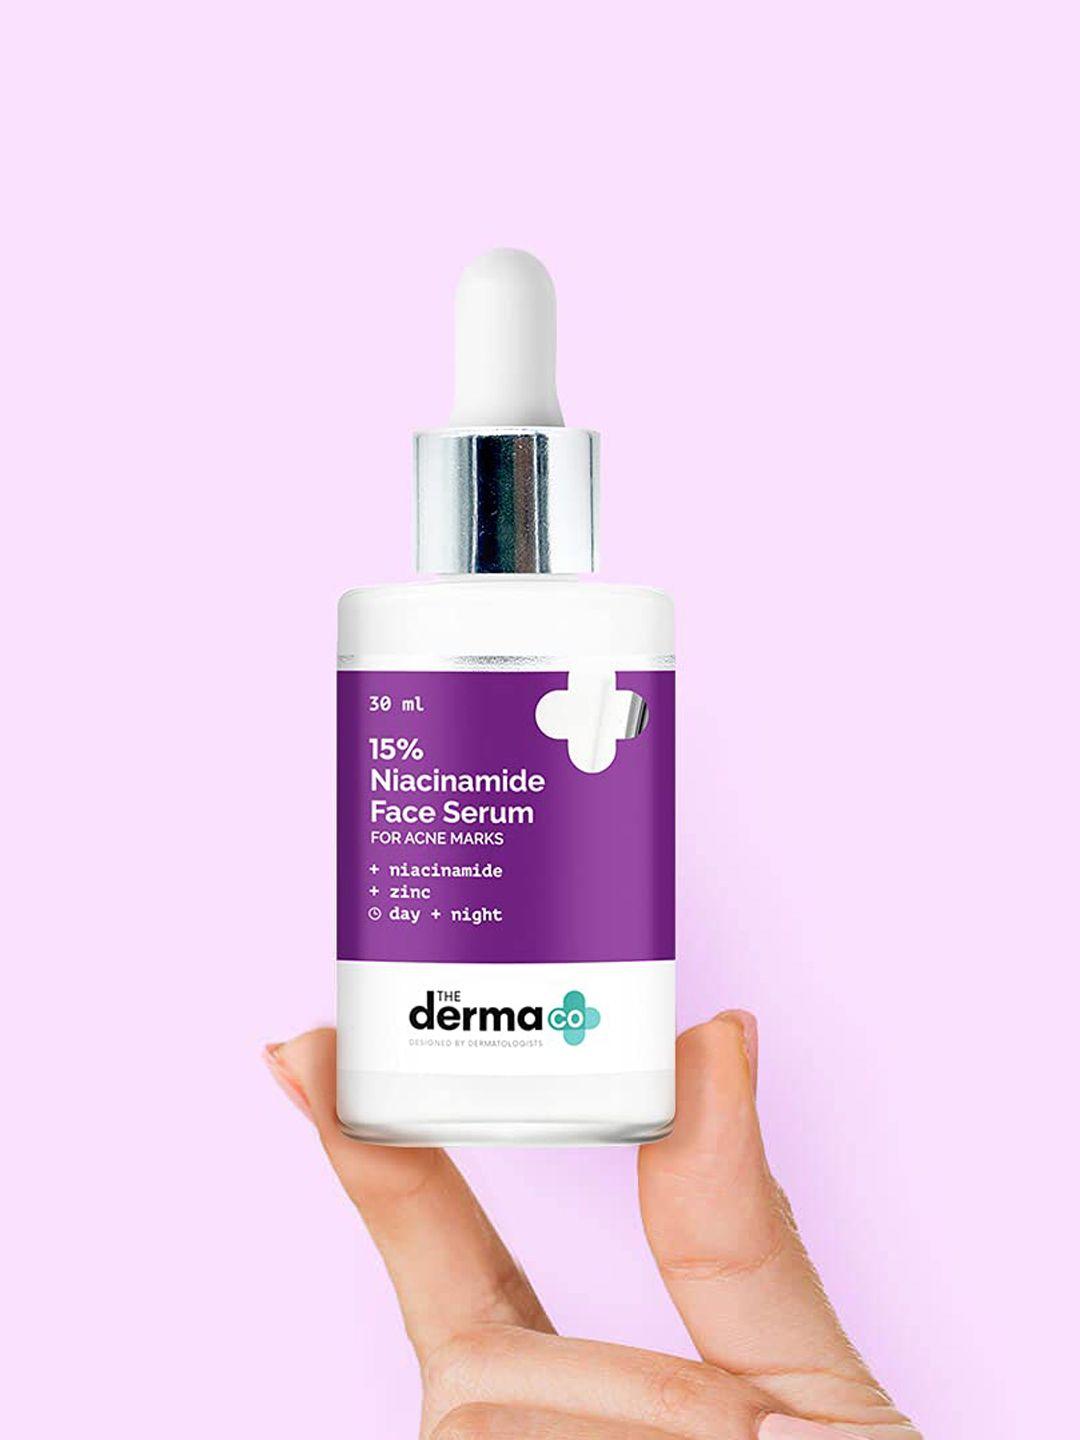 the derma co. unisex 15% niacinamide face serum with zinc for acne marks 30ml